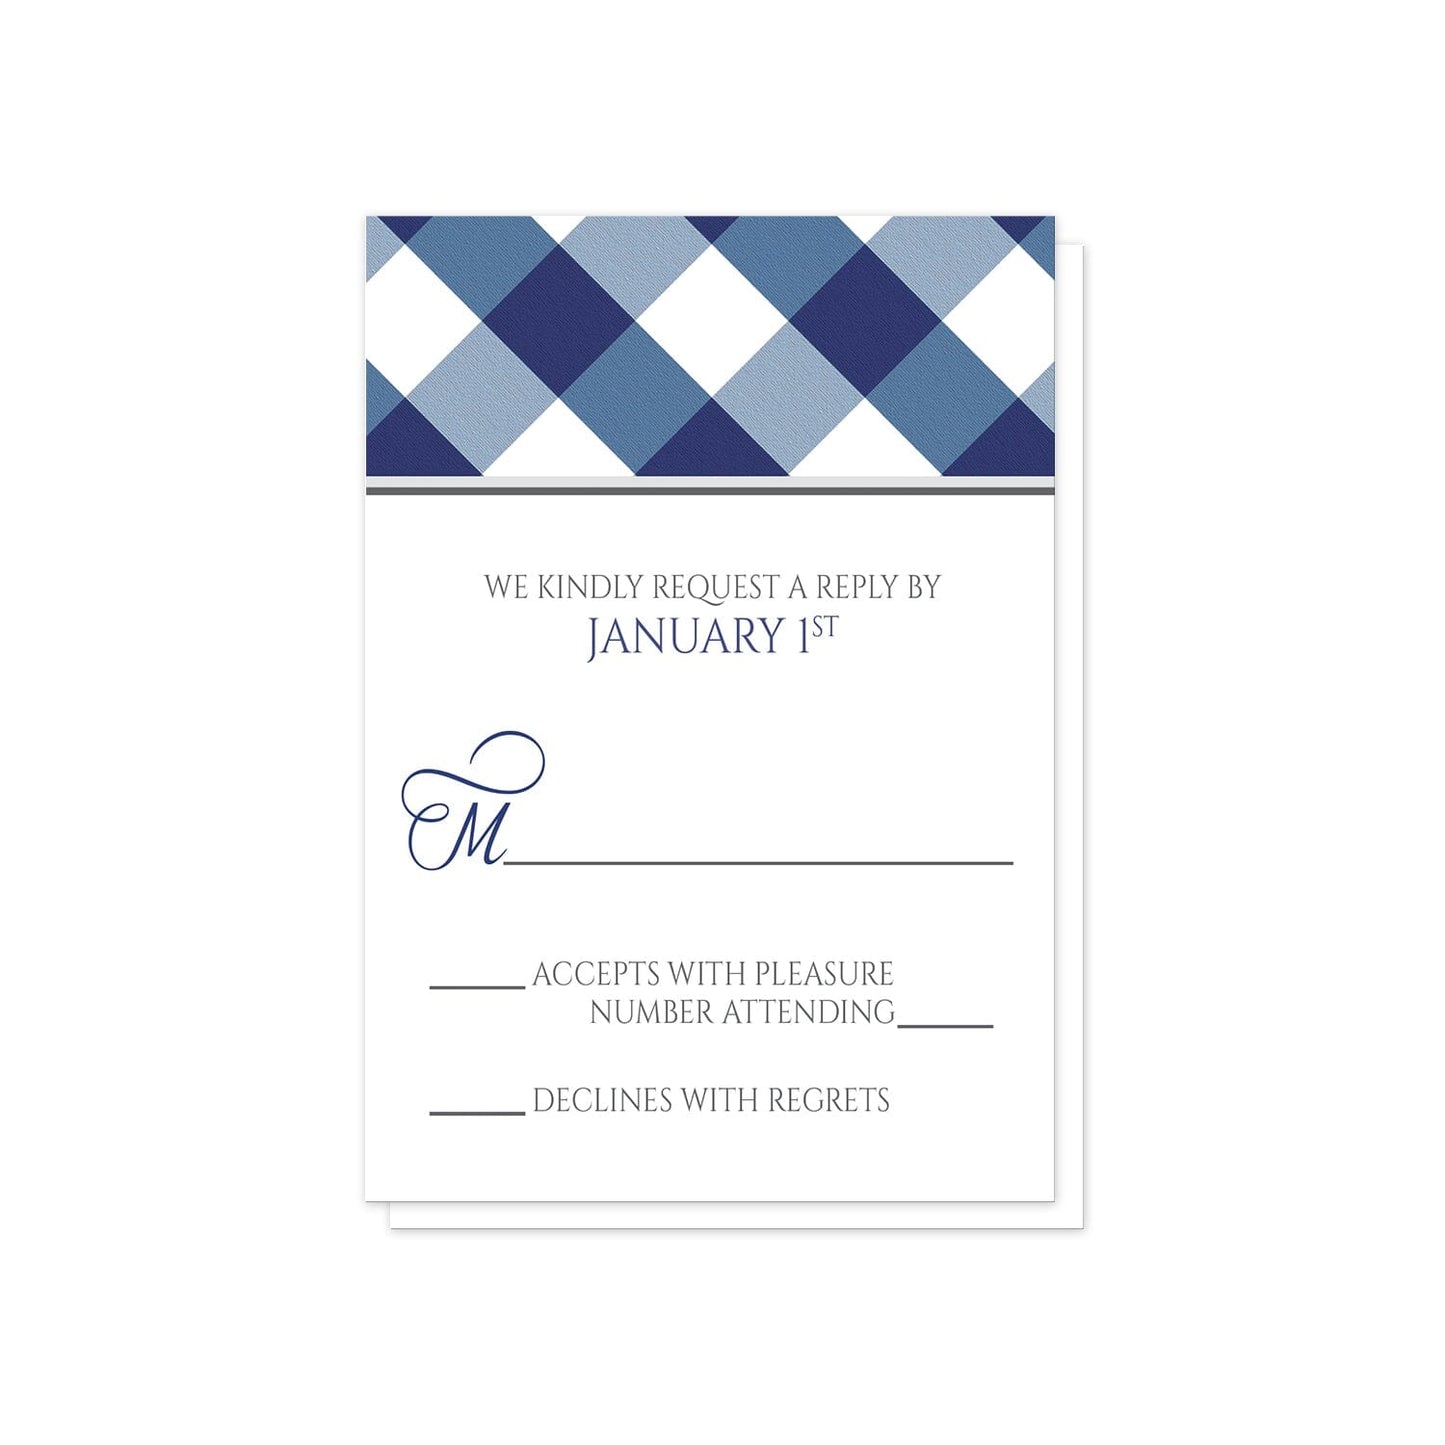 Navy Blue Gingham RSVP Cards at Artistically Invited.